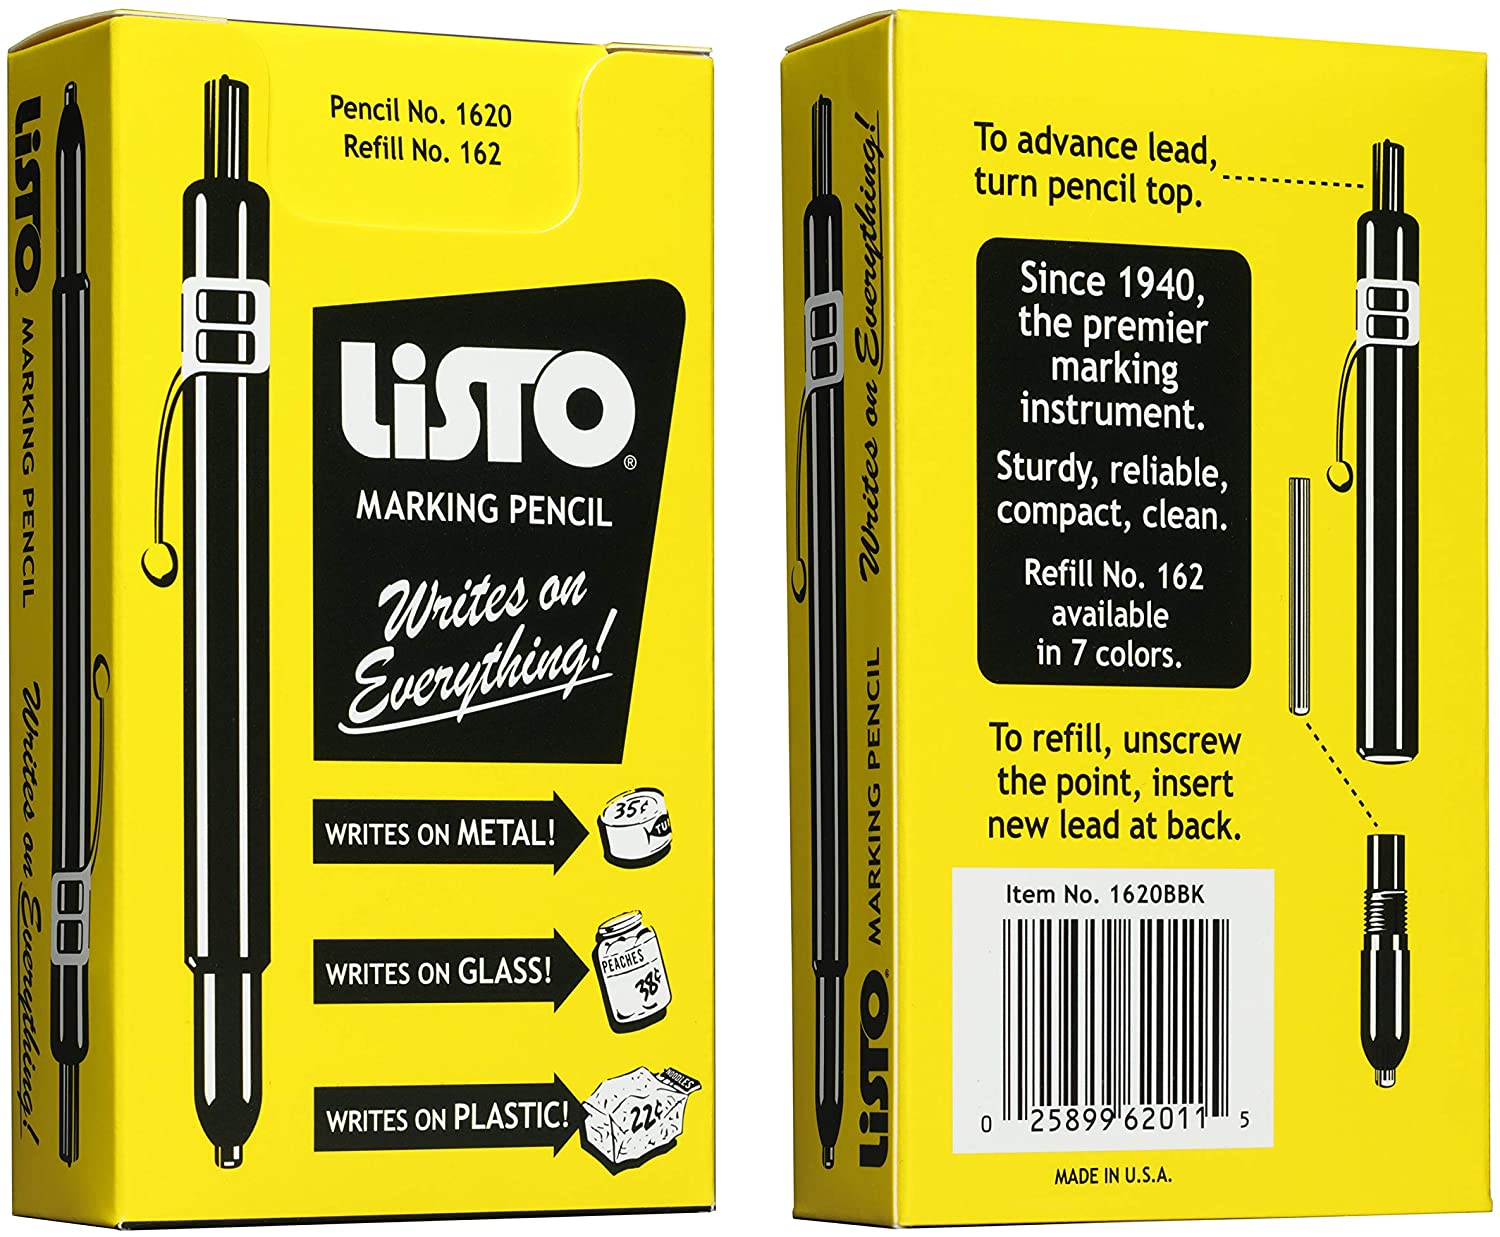 Listo 1620 - Box of 12 - Black Color - China Markers/Grease Pencils/China Marking/Pencils/Wax Pencils